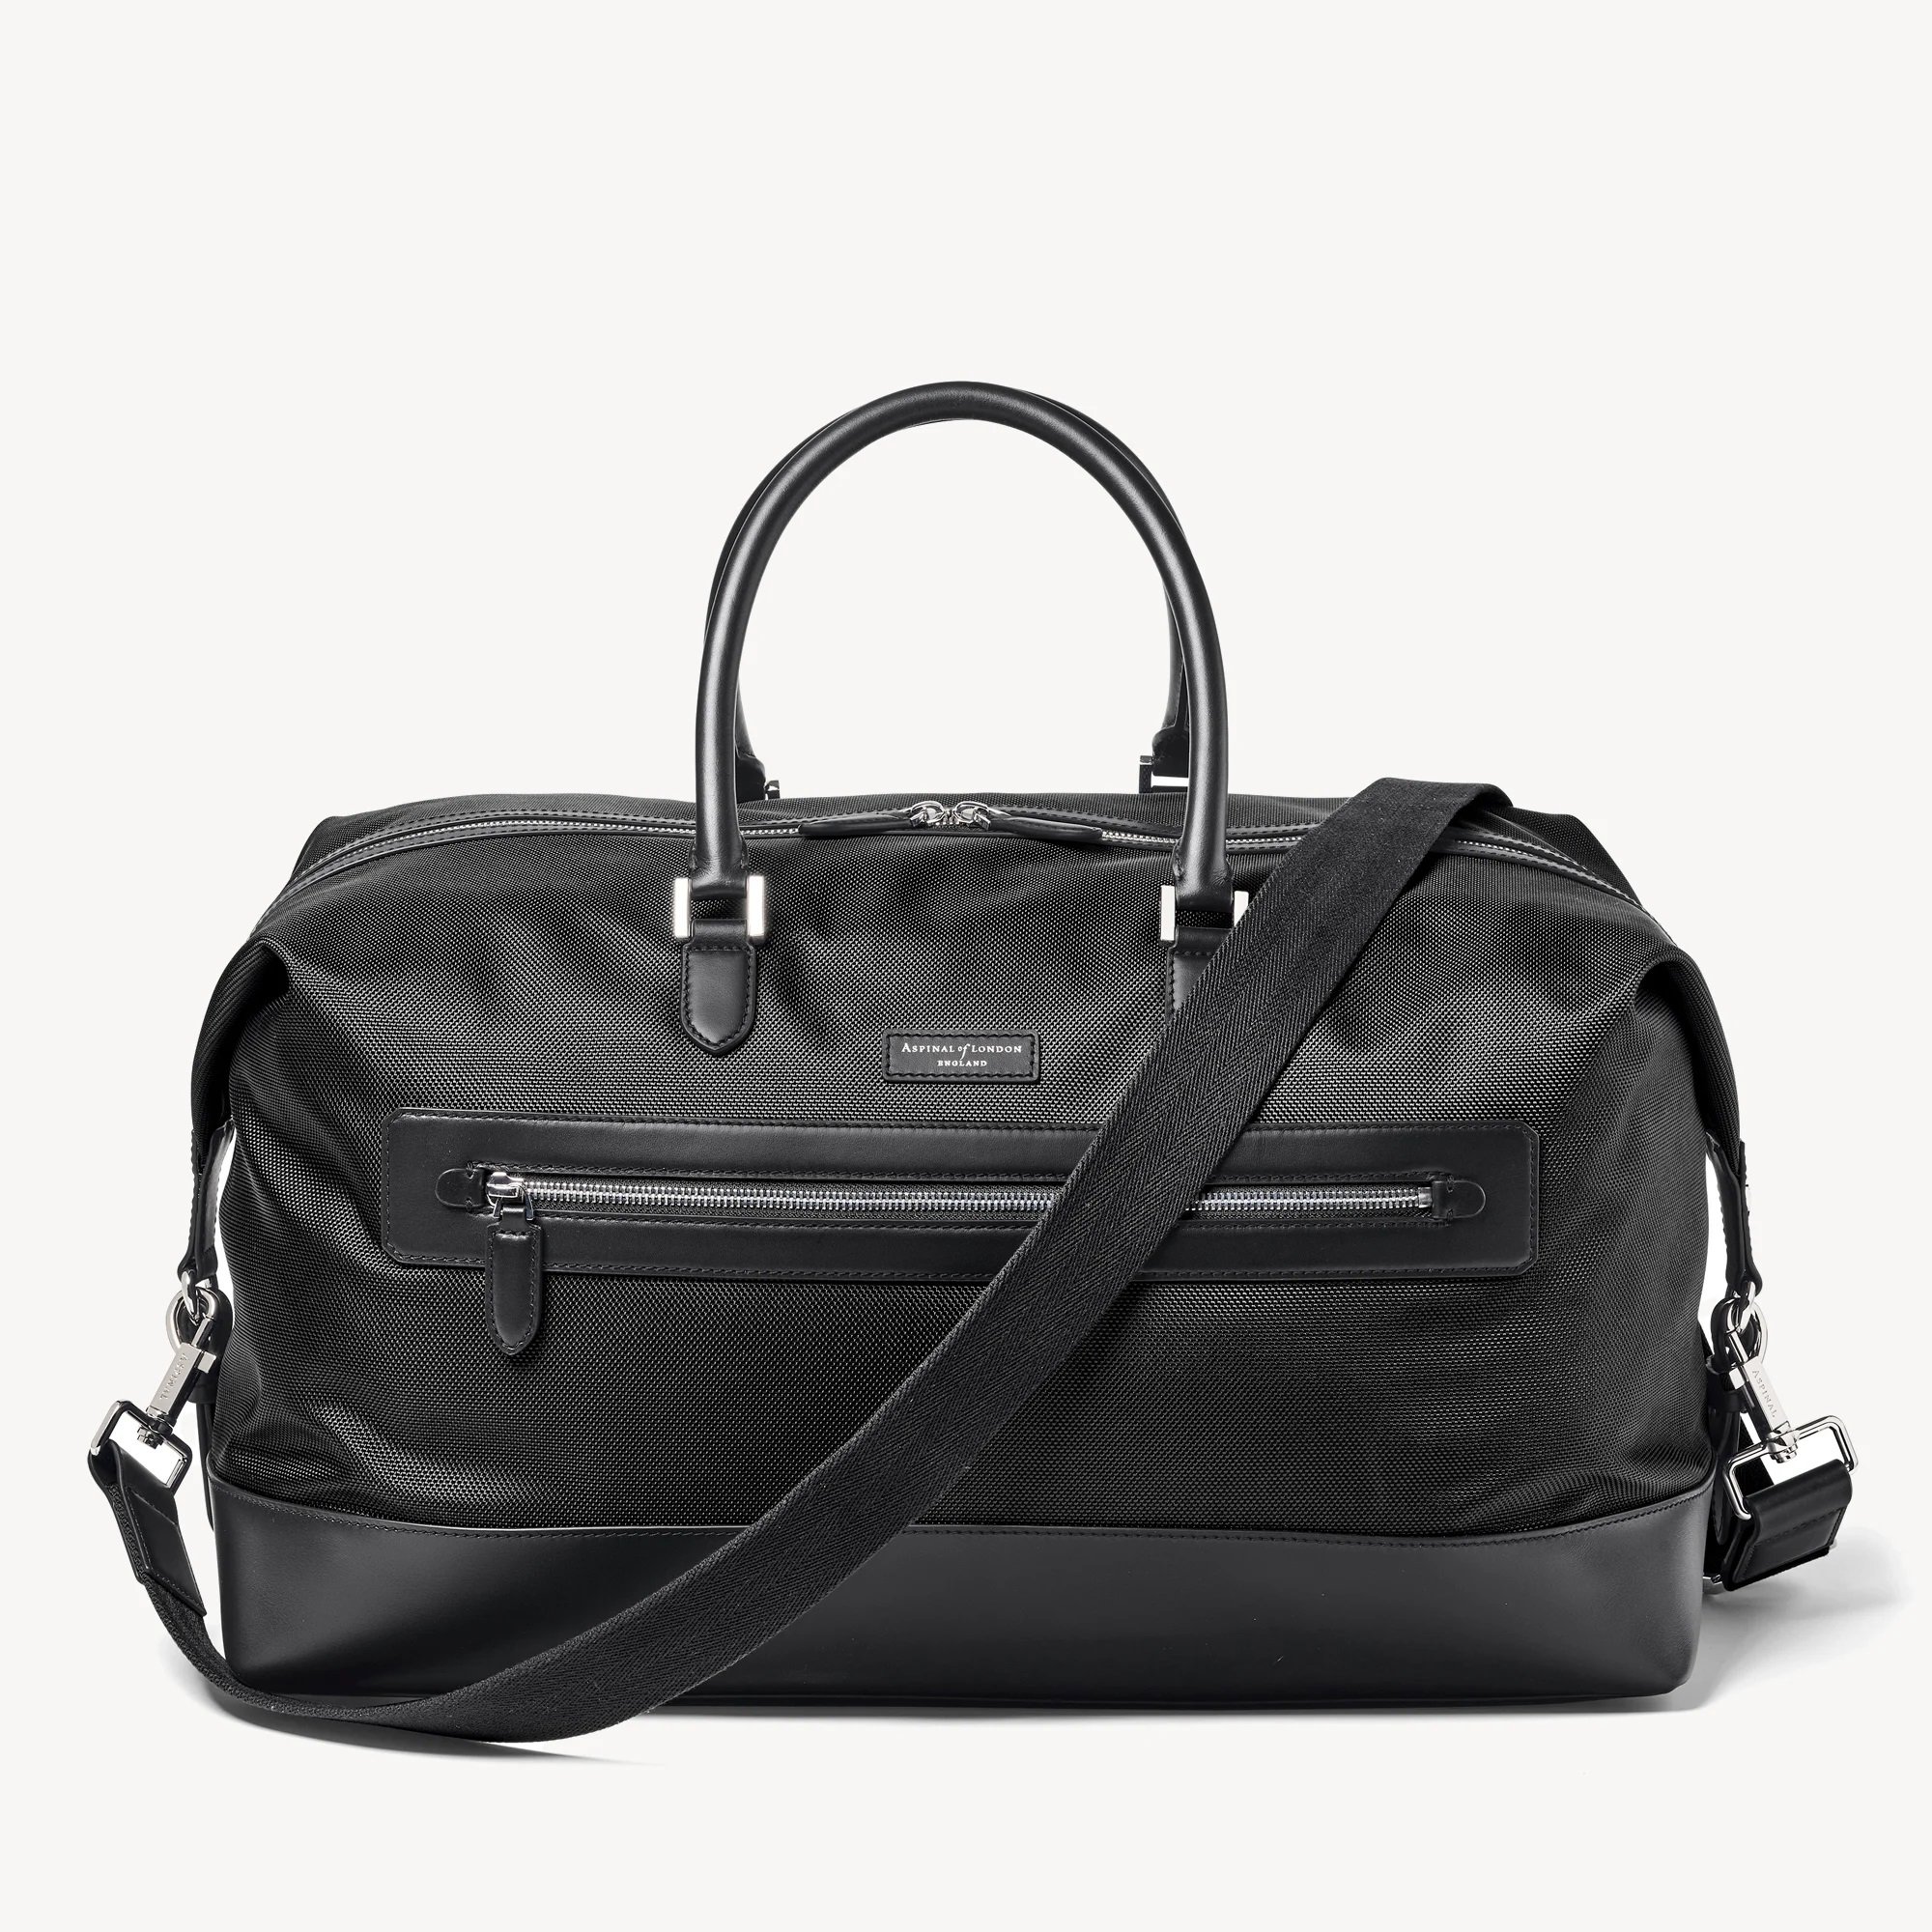 Aspinal of London Men's Holdall in Black Leather-Trim Nylon Canvas.jpg